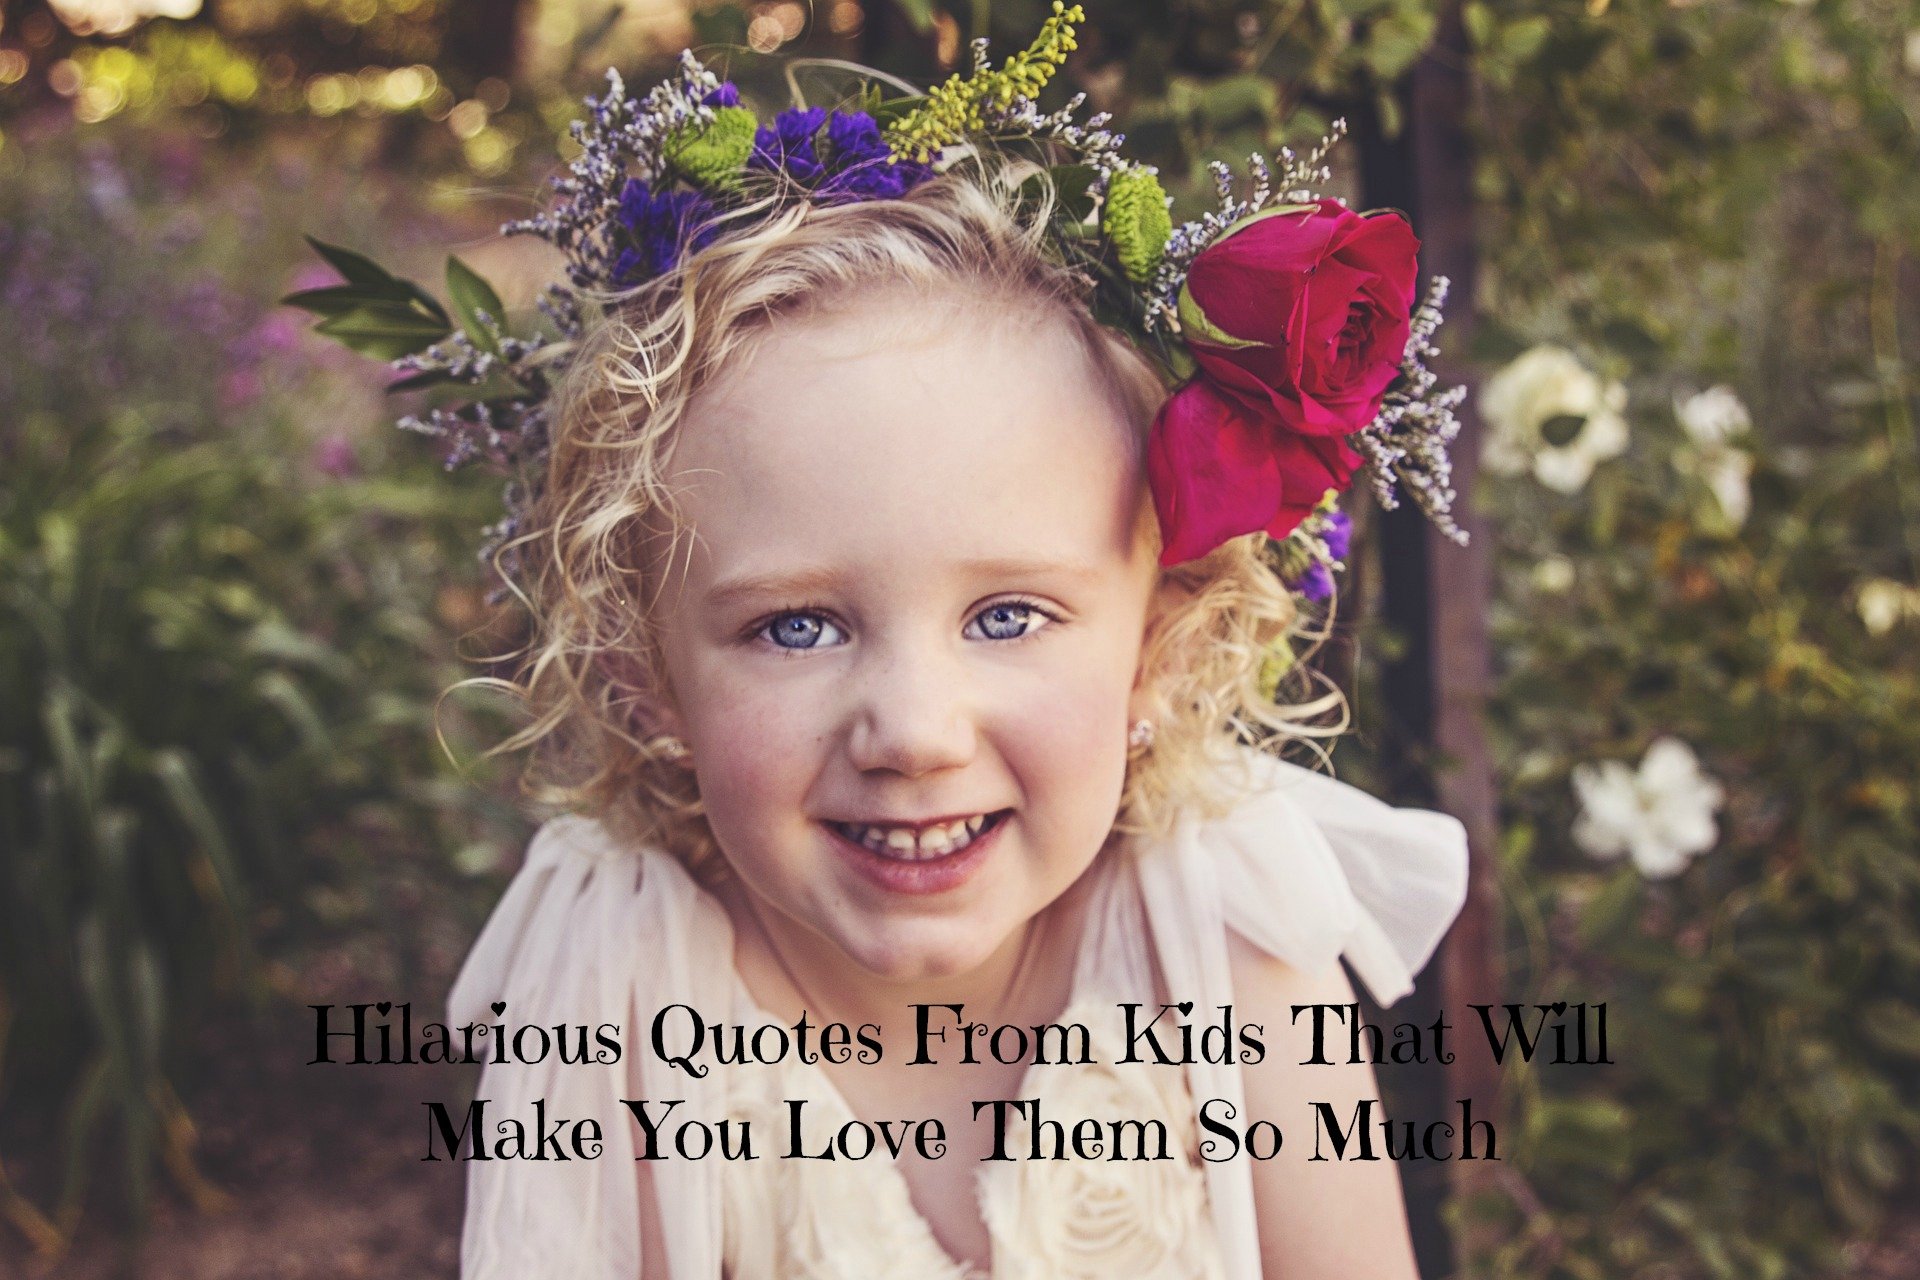 Hilarious Quotes From Kids That Will Make You Love Them So Much